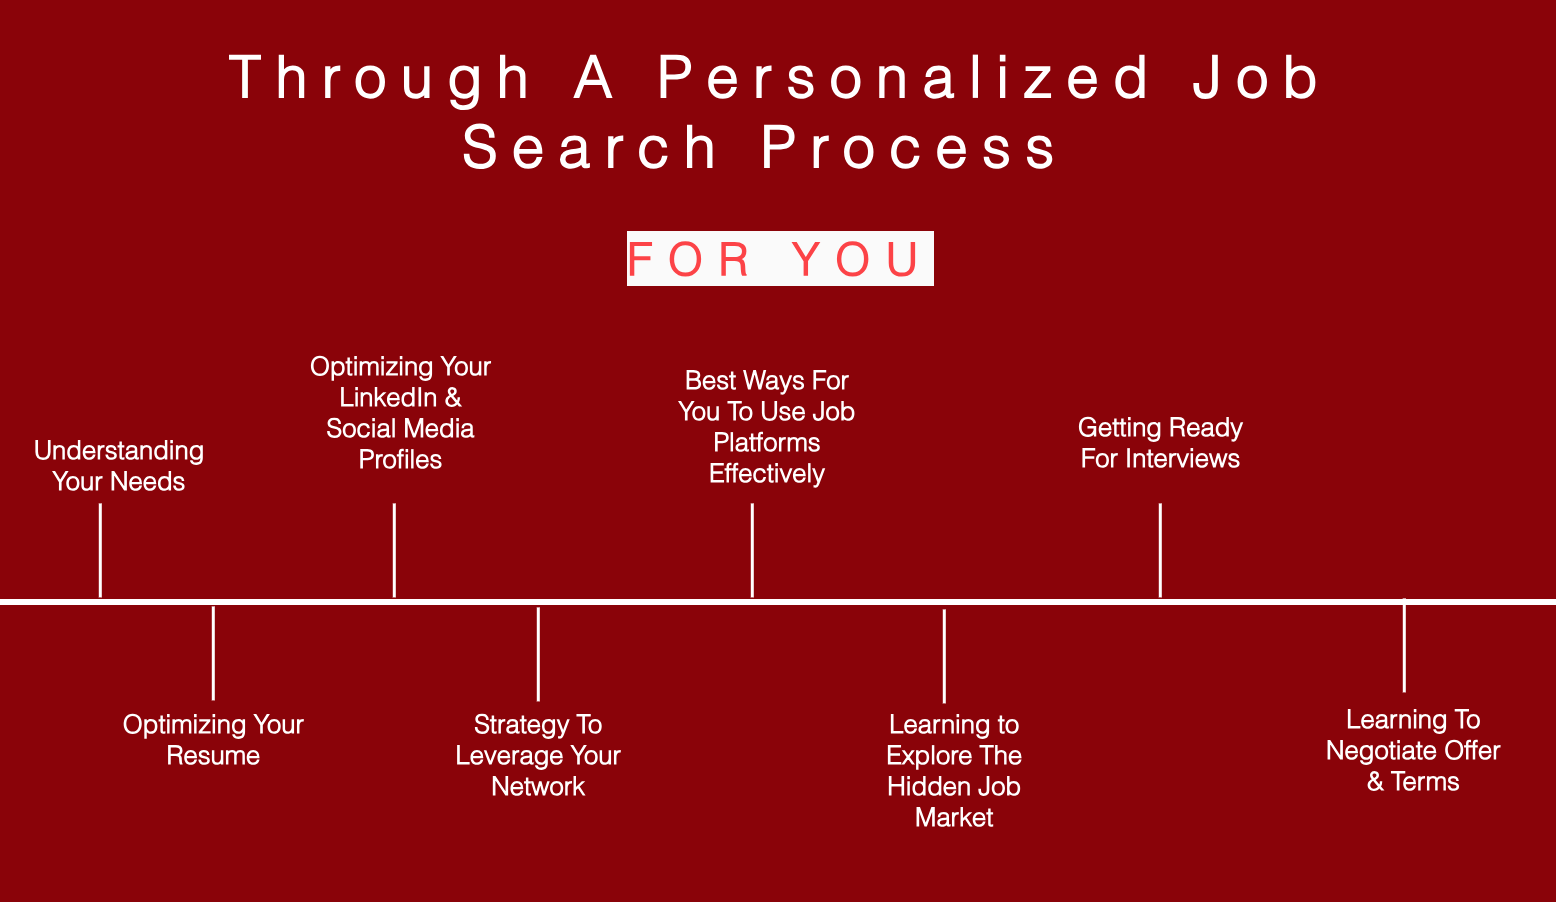 A personalized job process that has the following steps - Understanding your needs, optimizing your resume, optimizing your linkedin and social media profiles, strategy to leverage your network, best ways for you to use job platforms effectively, learning to explore the job market, getting ready for interviews and learning to negotiate offer and terms.